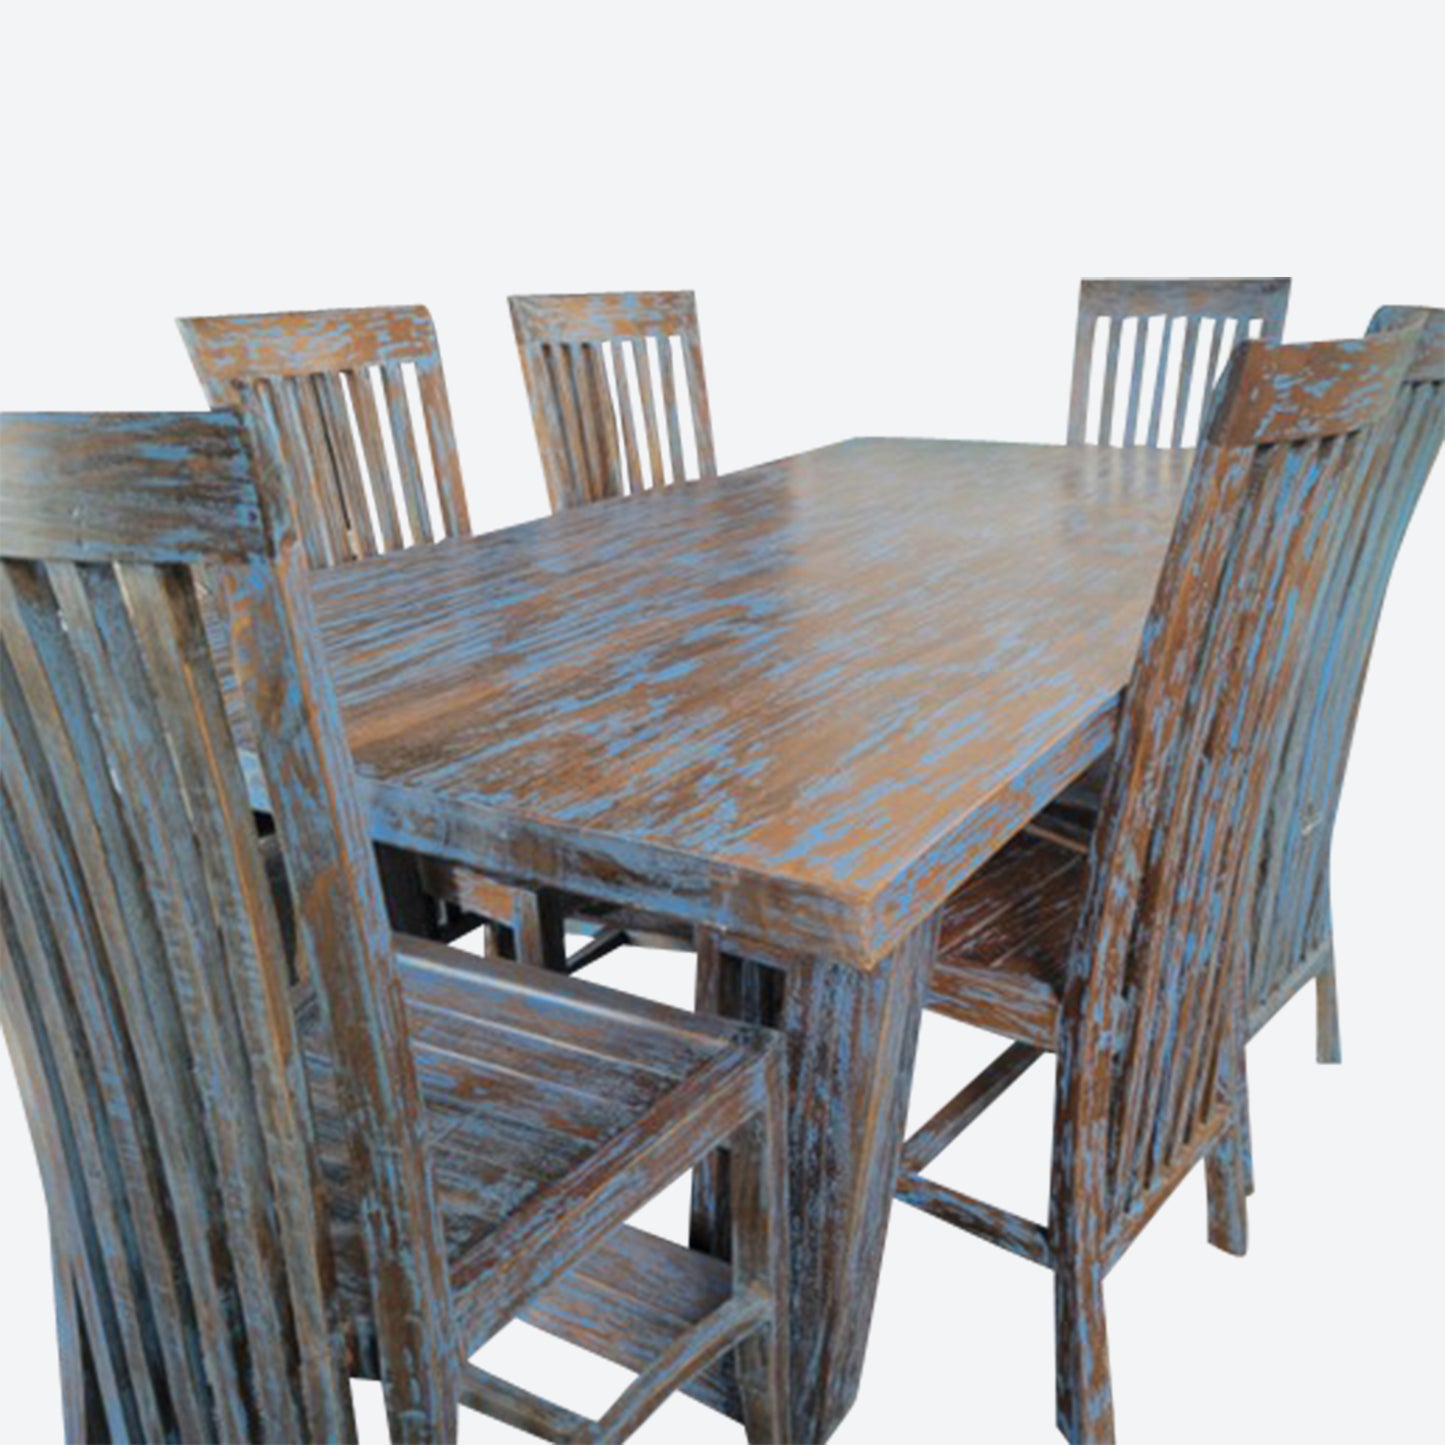 Teak Bluewash Dining Table Set Of 6 Chairs And [1 Table] -SK- SKU 1096